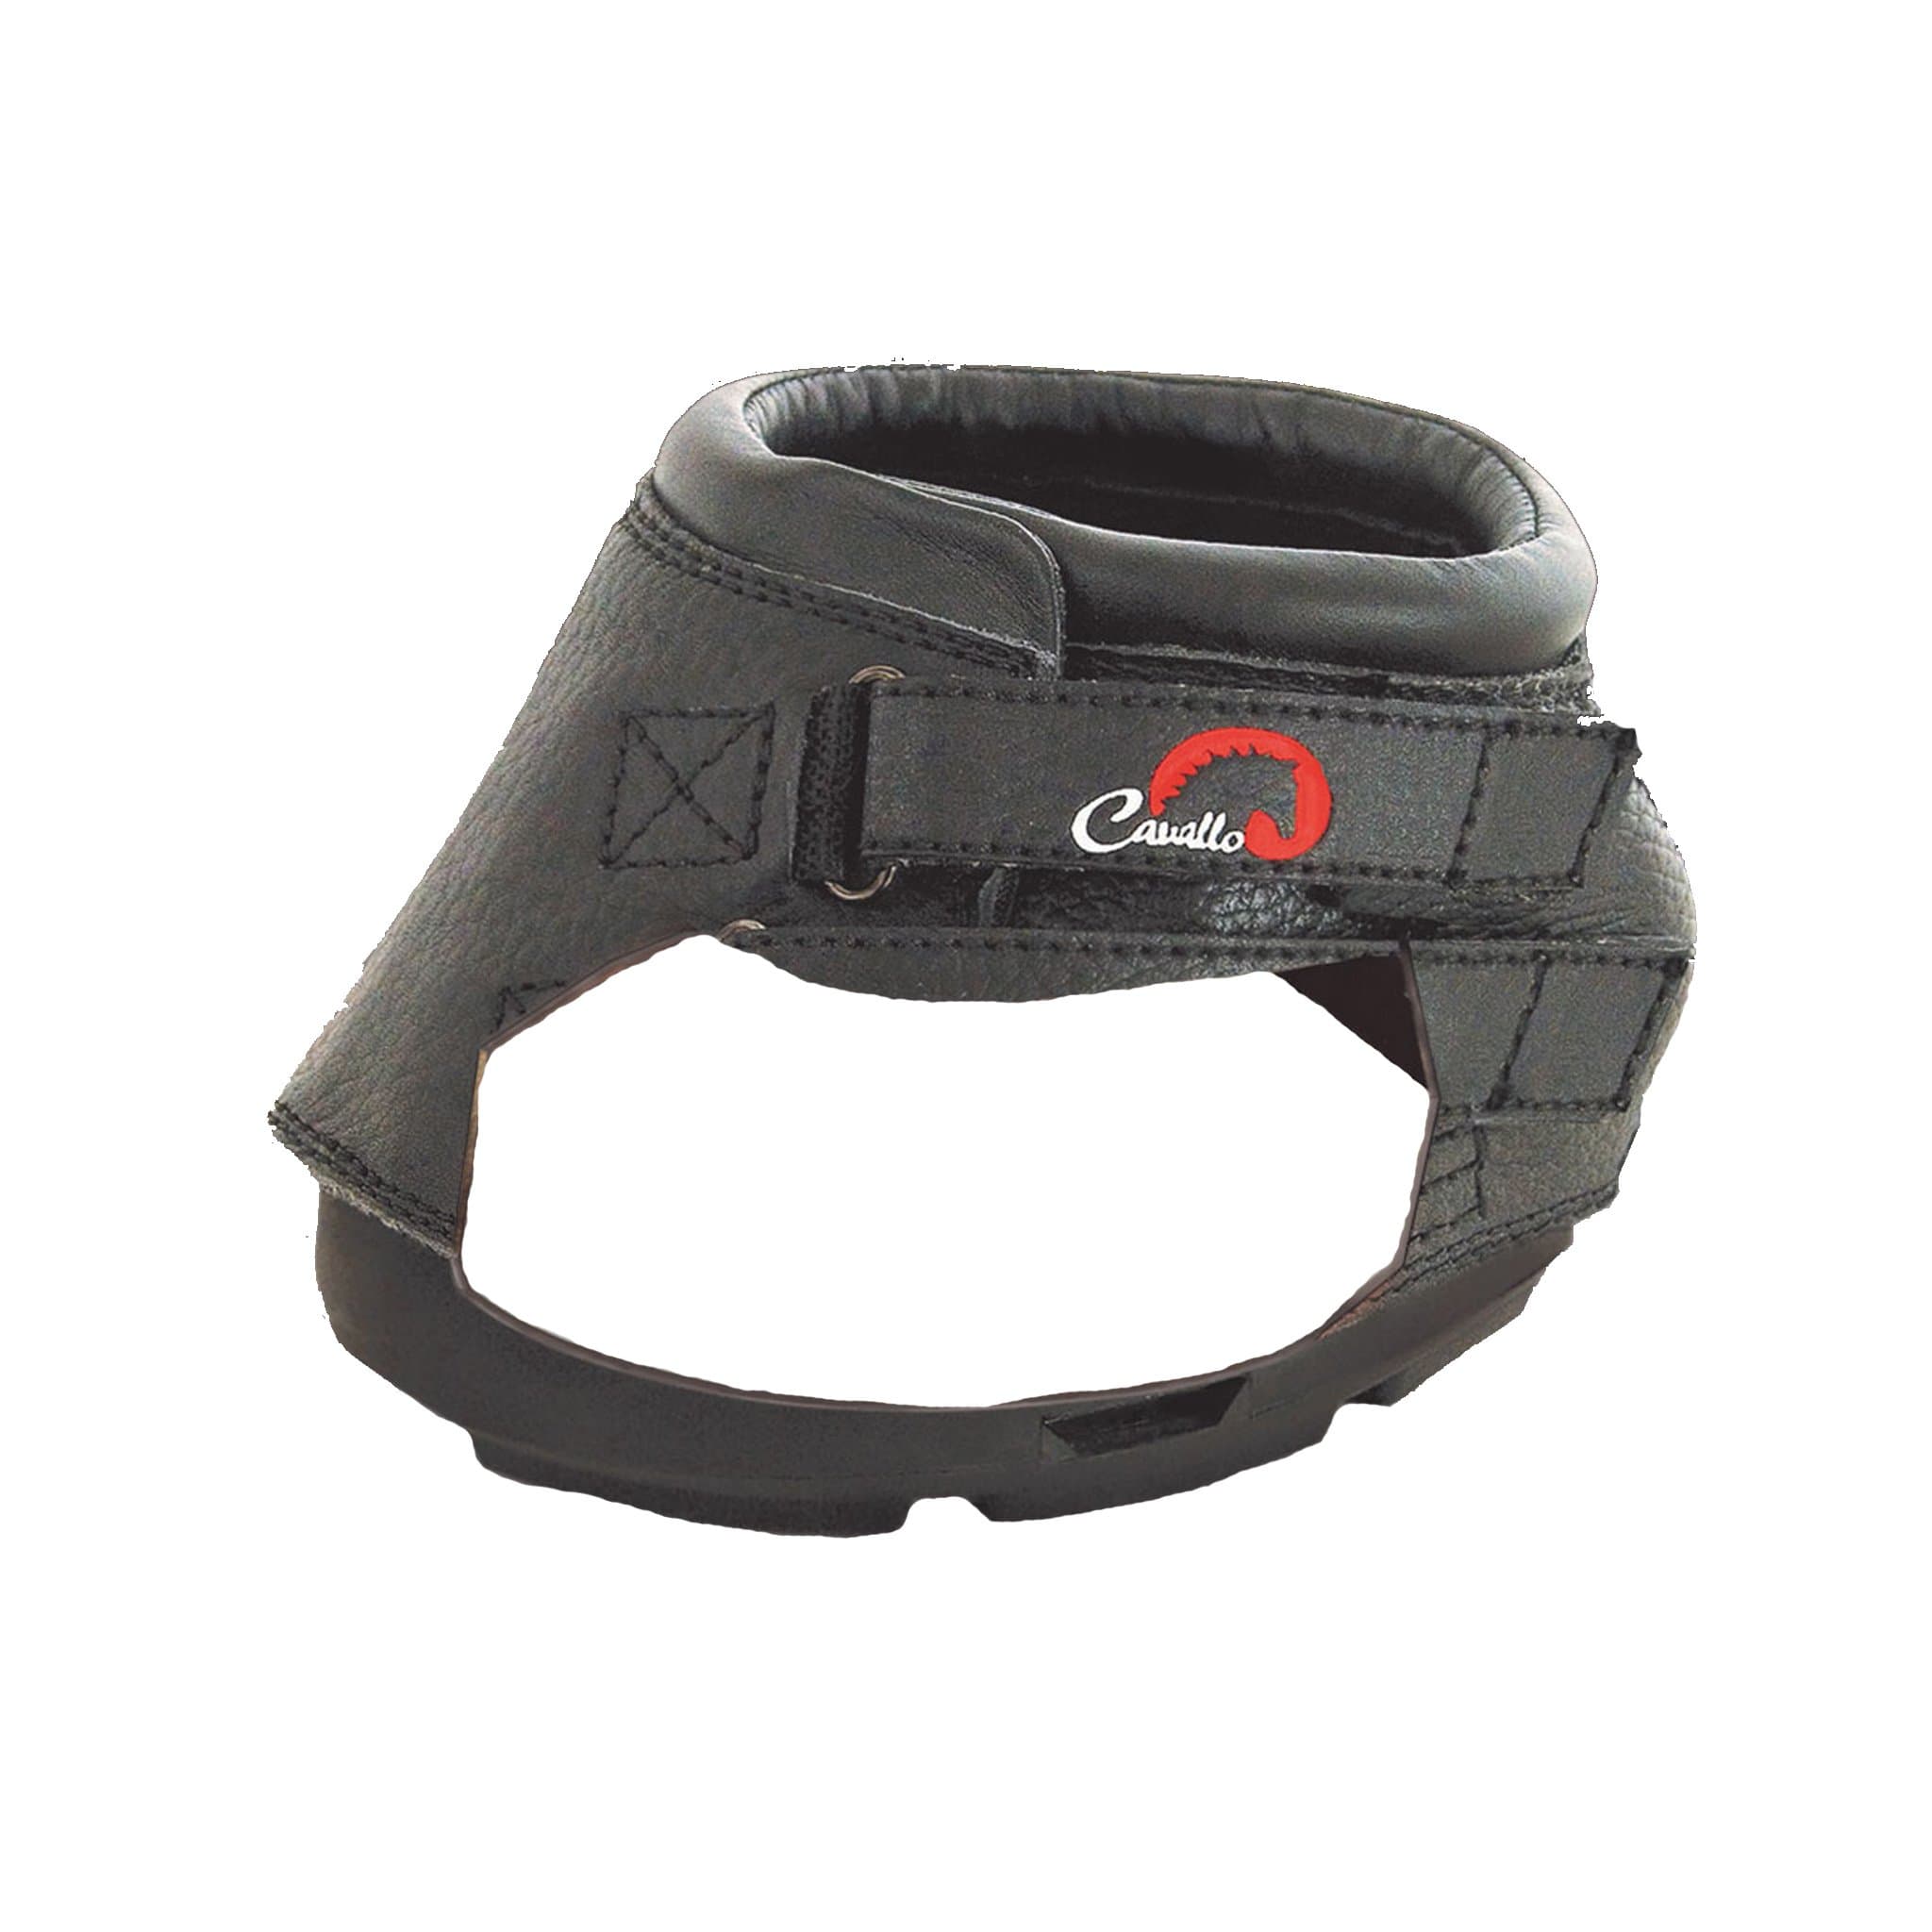 Cavallo Support Pads 11611